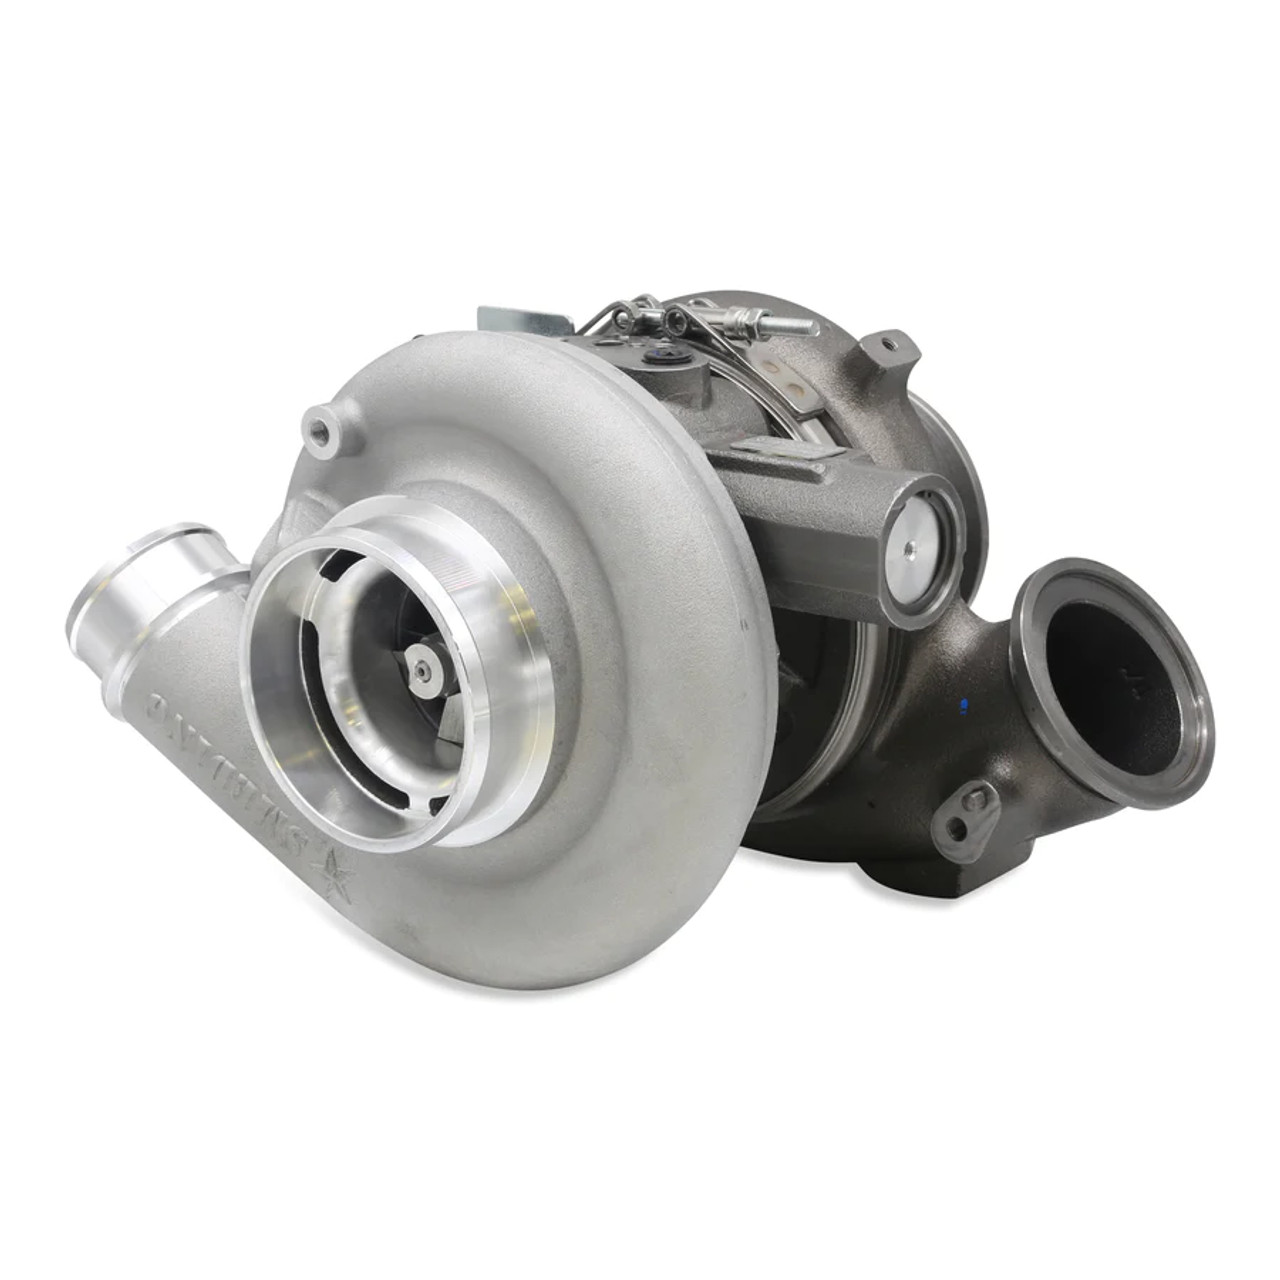 Smeding Diesel Stage 1 VGT TURBO for 2003-2007 6.0L Powerstroke - Main View